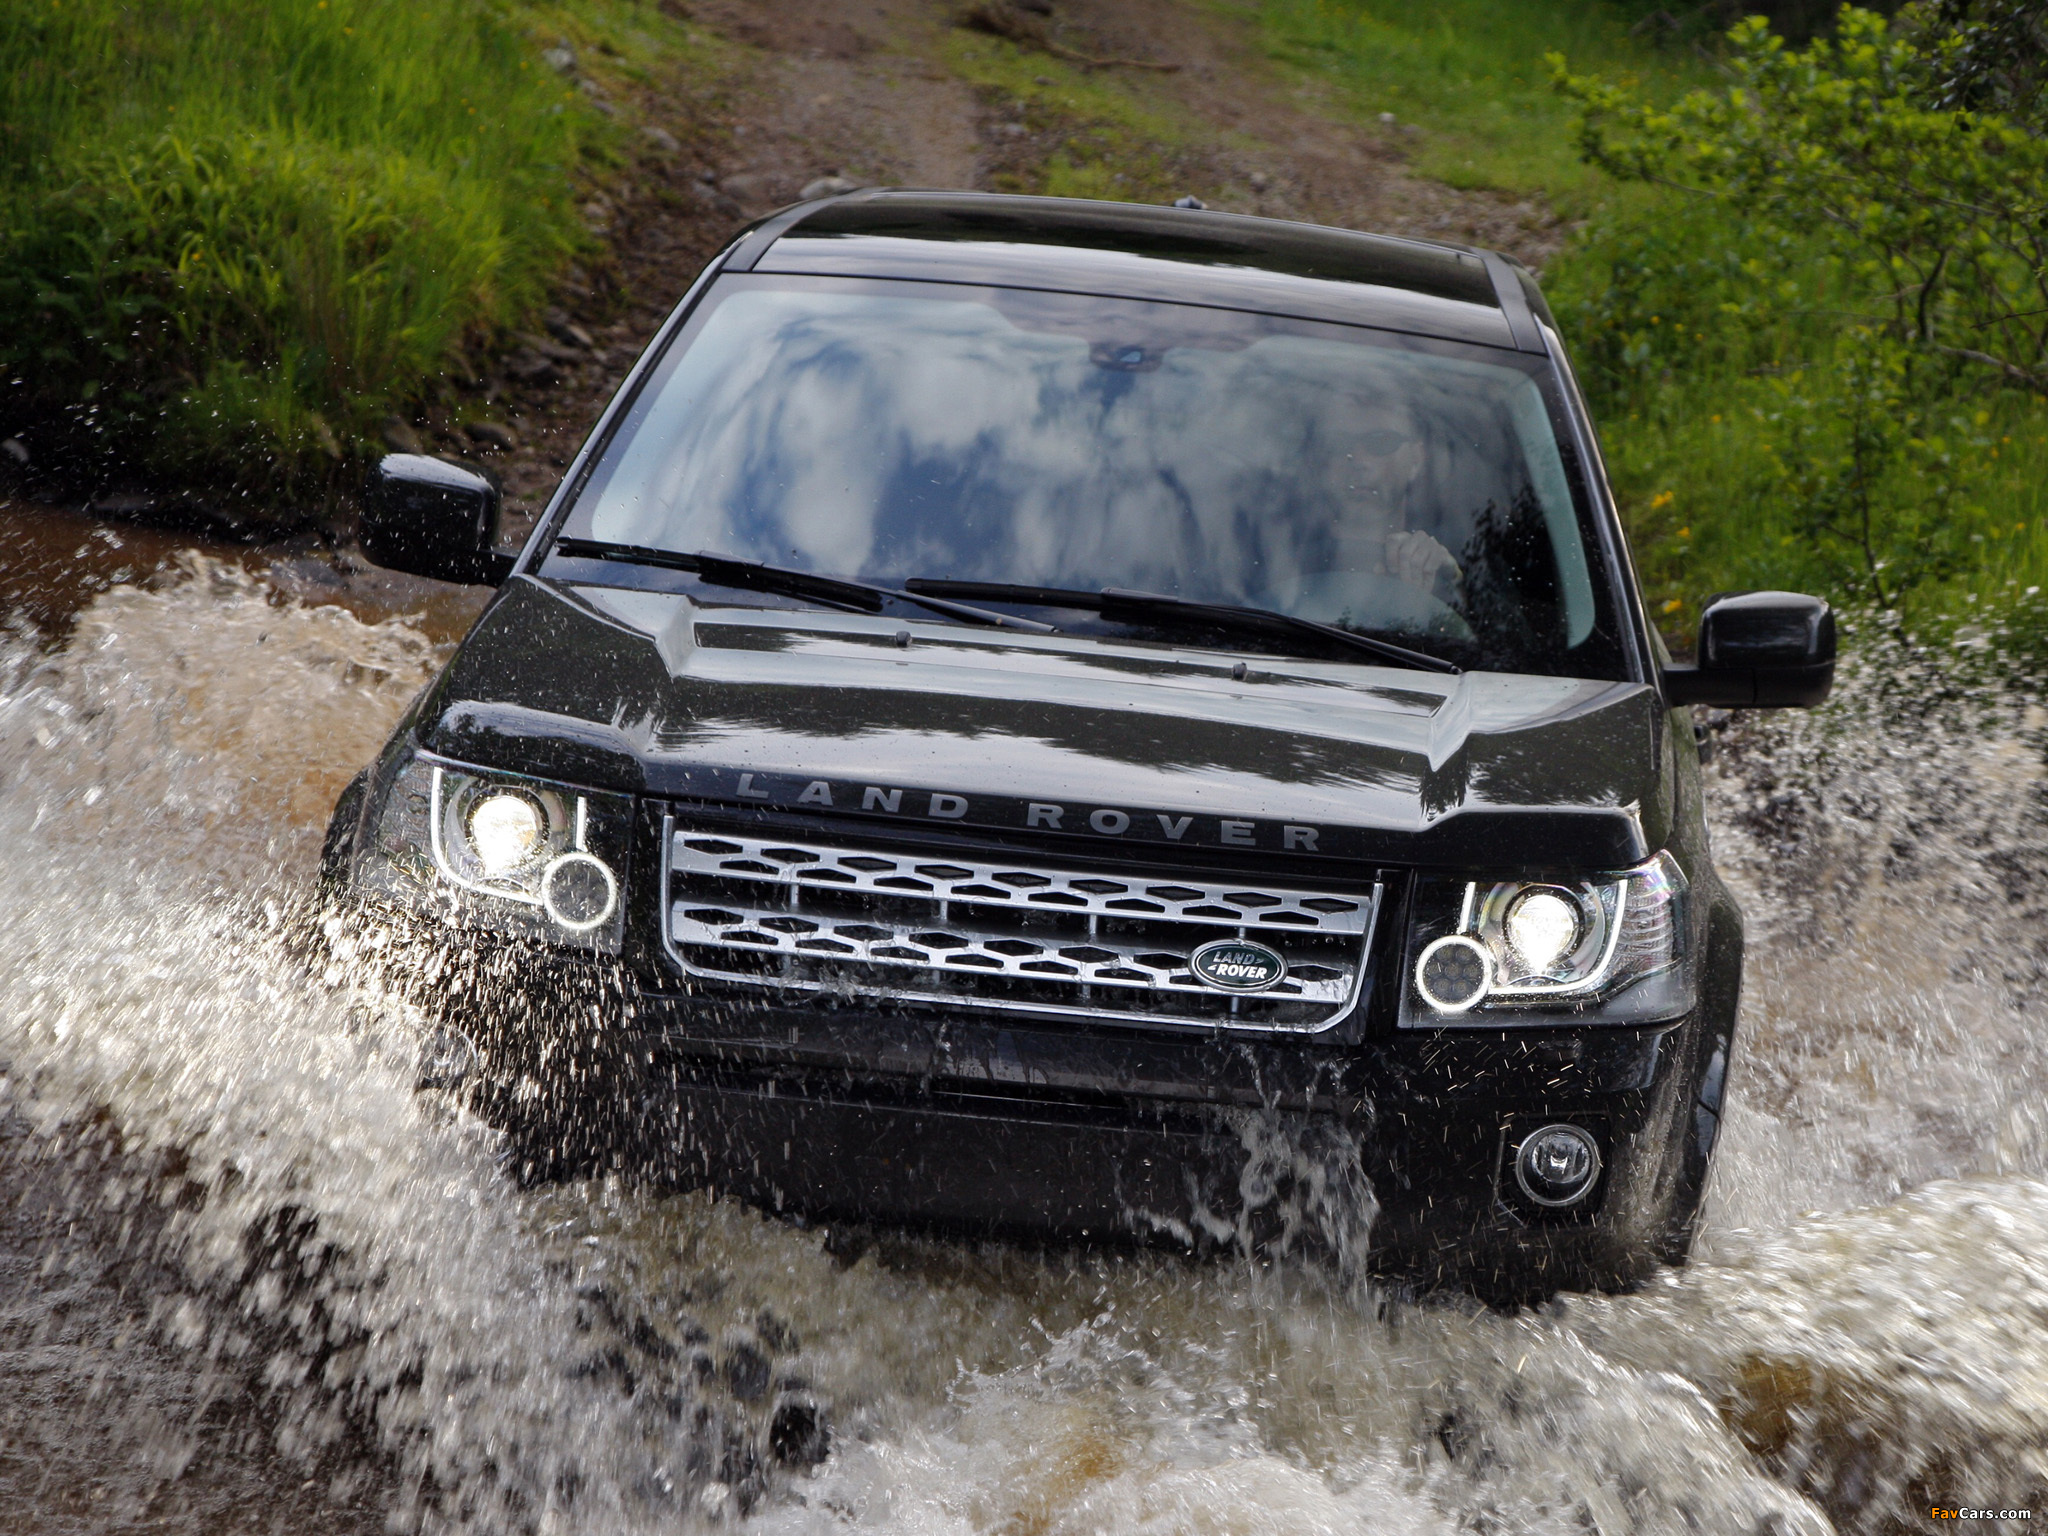 Land Rover Freelander 2 SD4 2012 pictures (2048x1536)